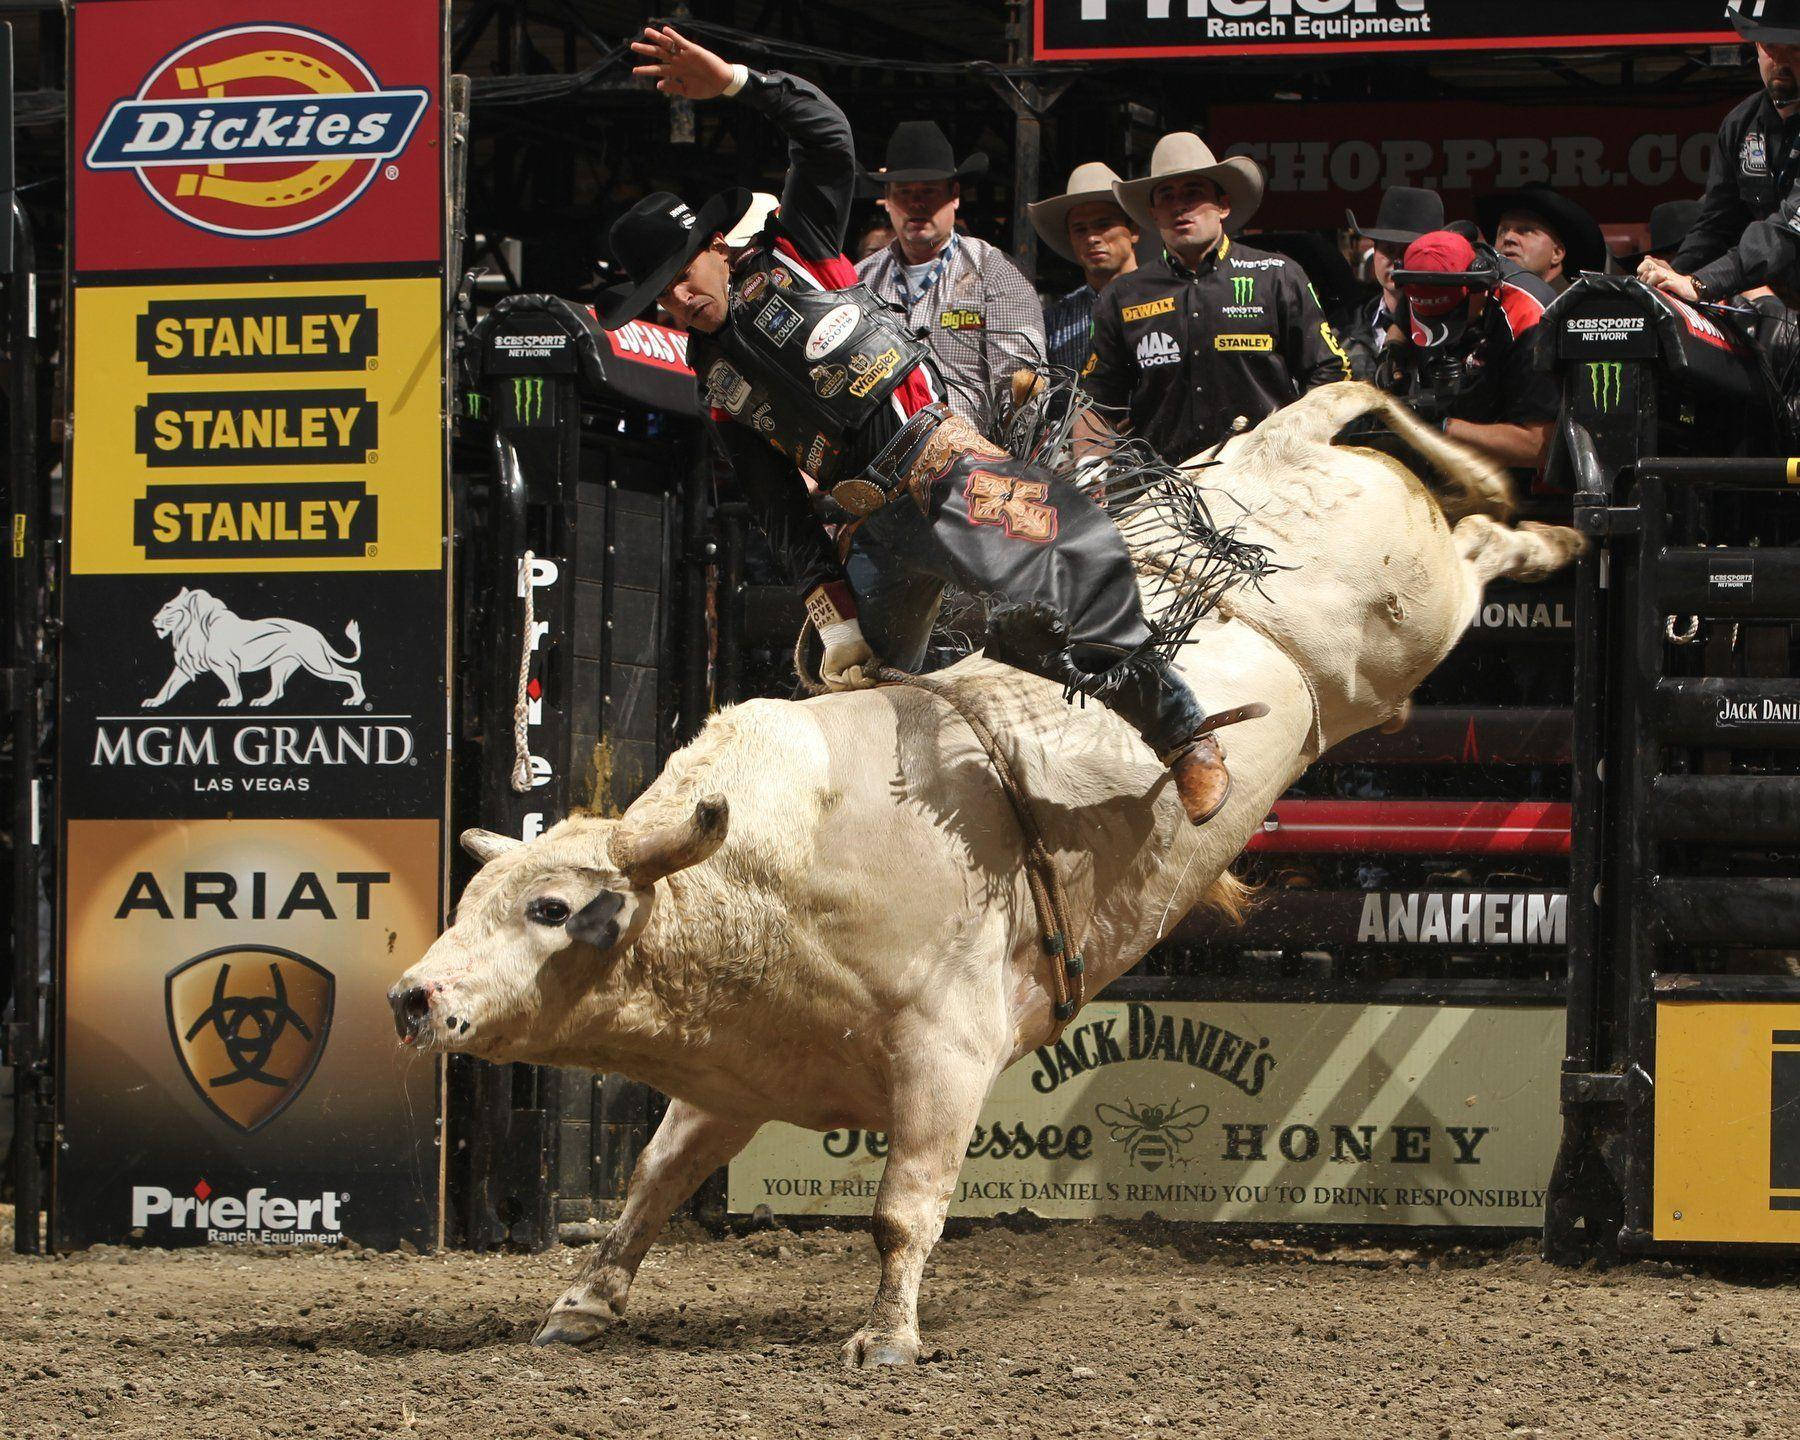 A Daredevil Bull Rider Shows Their Fearlessness And Skill Atop A Raging Bull. Background